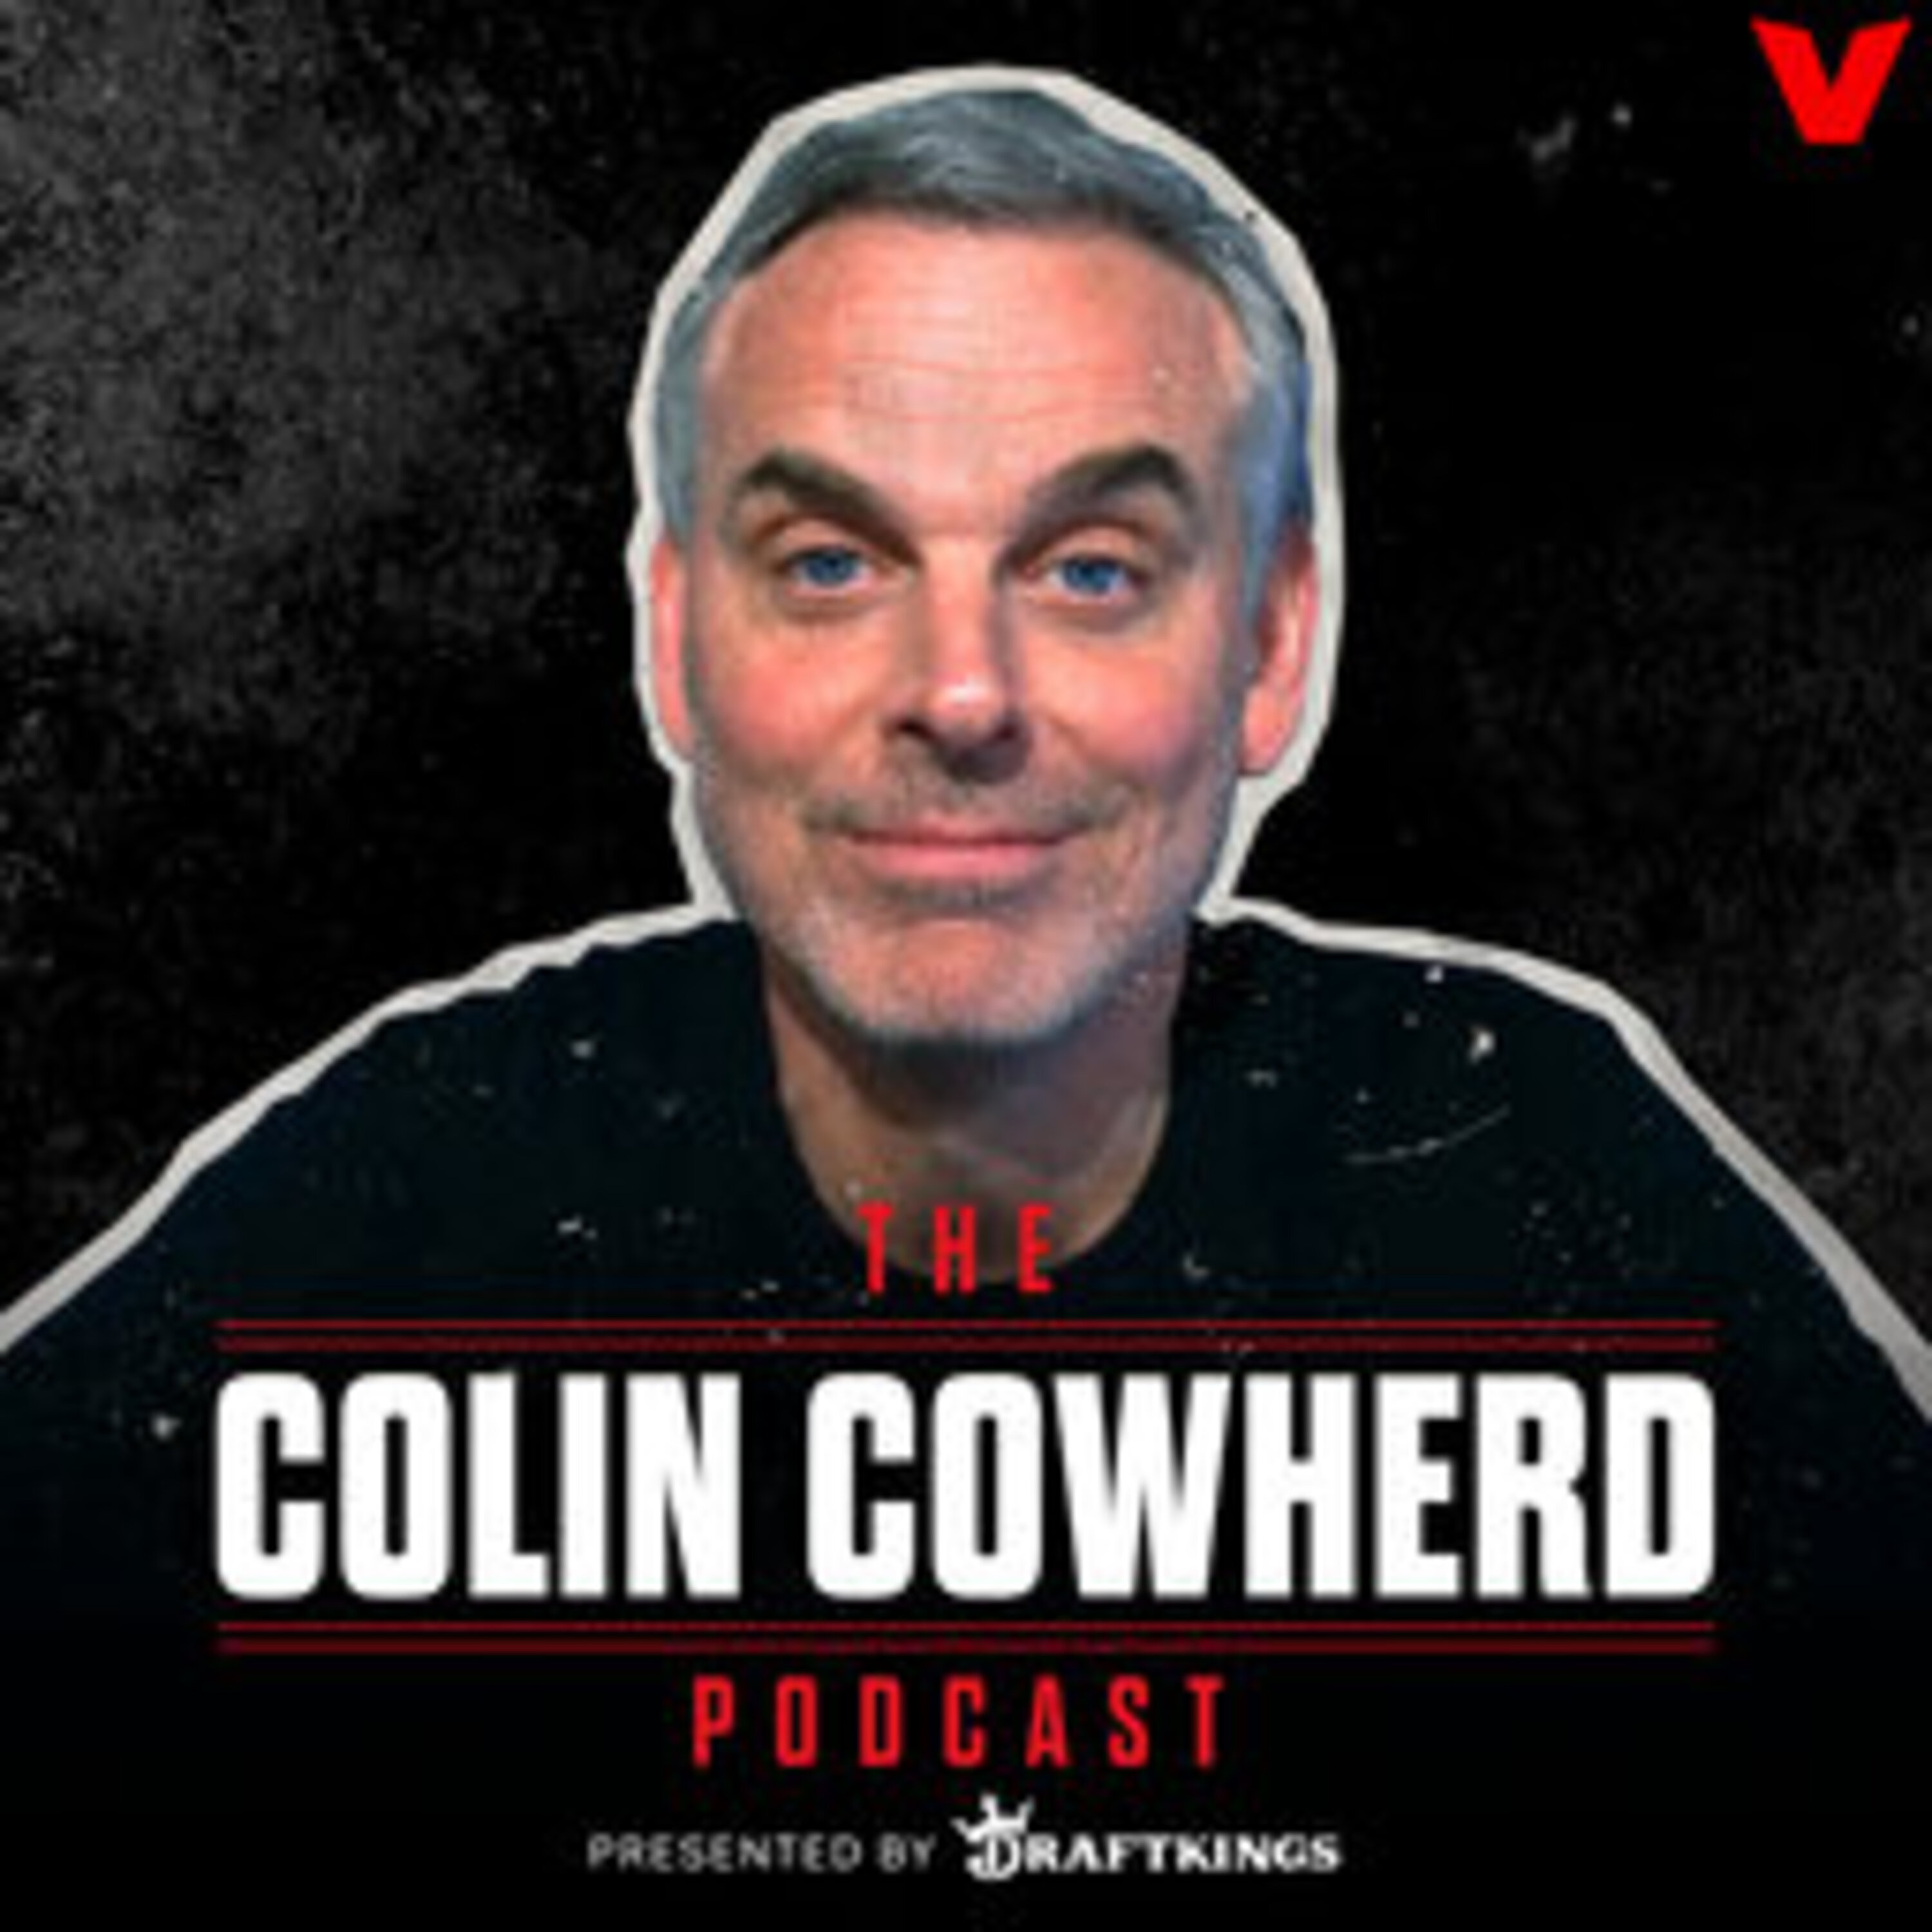 Colin Cowherd Podcast - INSTANT REACTION: Knicks Beat Pacers In Game 1